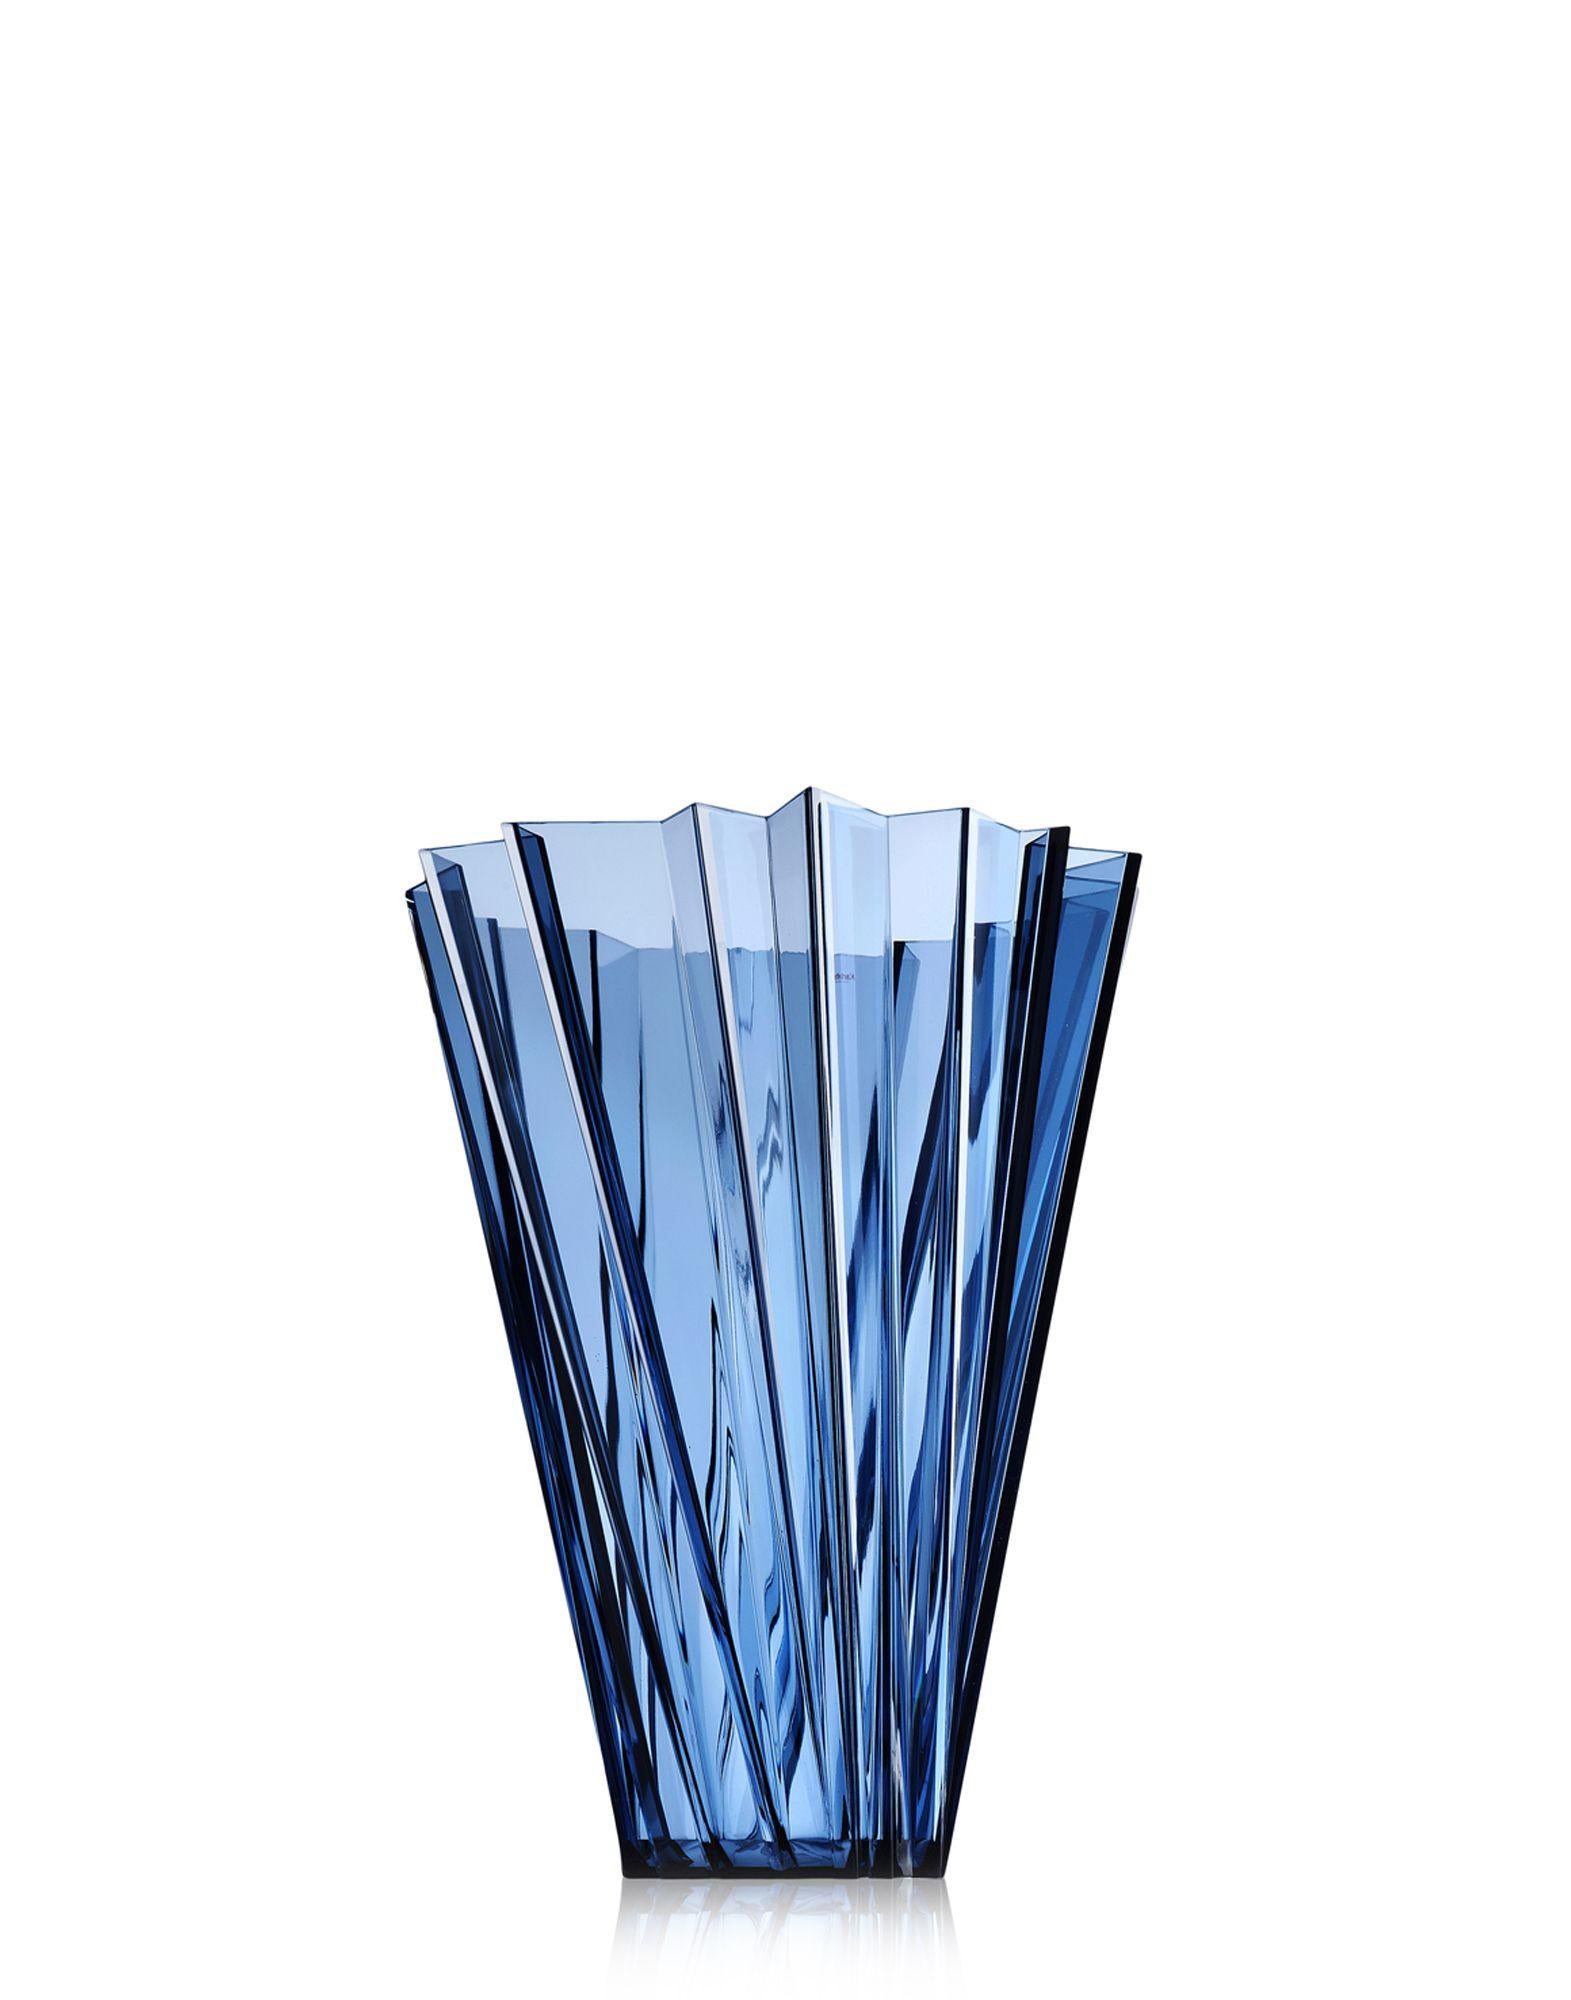 A multi-faceted vase widening from the base to the top in a swirling motion. Shanghai is like refracted light radiating from prism-like crystals with an alternating play of flashes and shadows, creating irregular geometric forms.

Available in